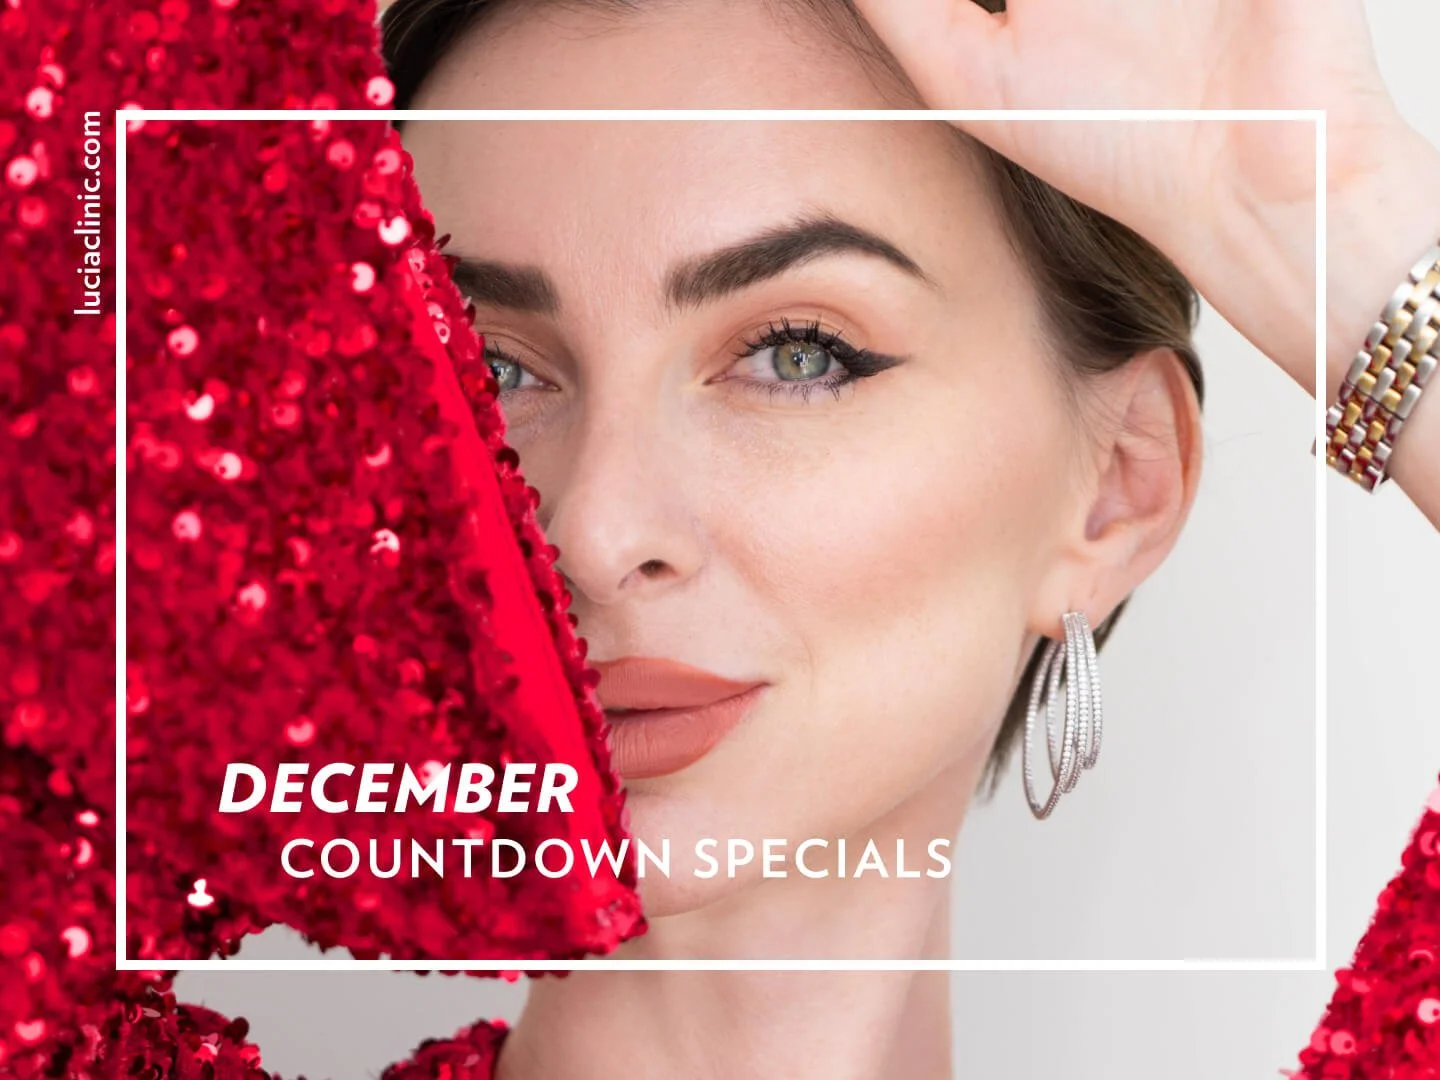 Sparkling beauty with Lucia Clinic’s December specials